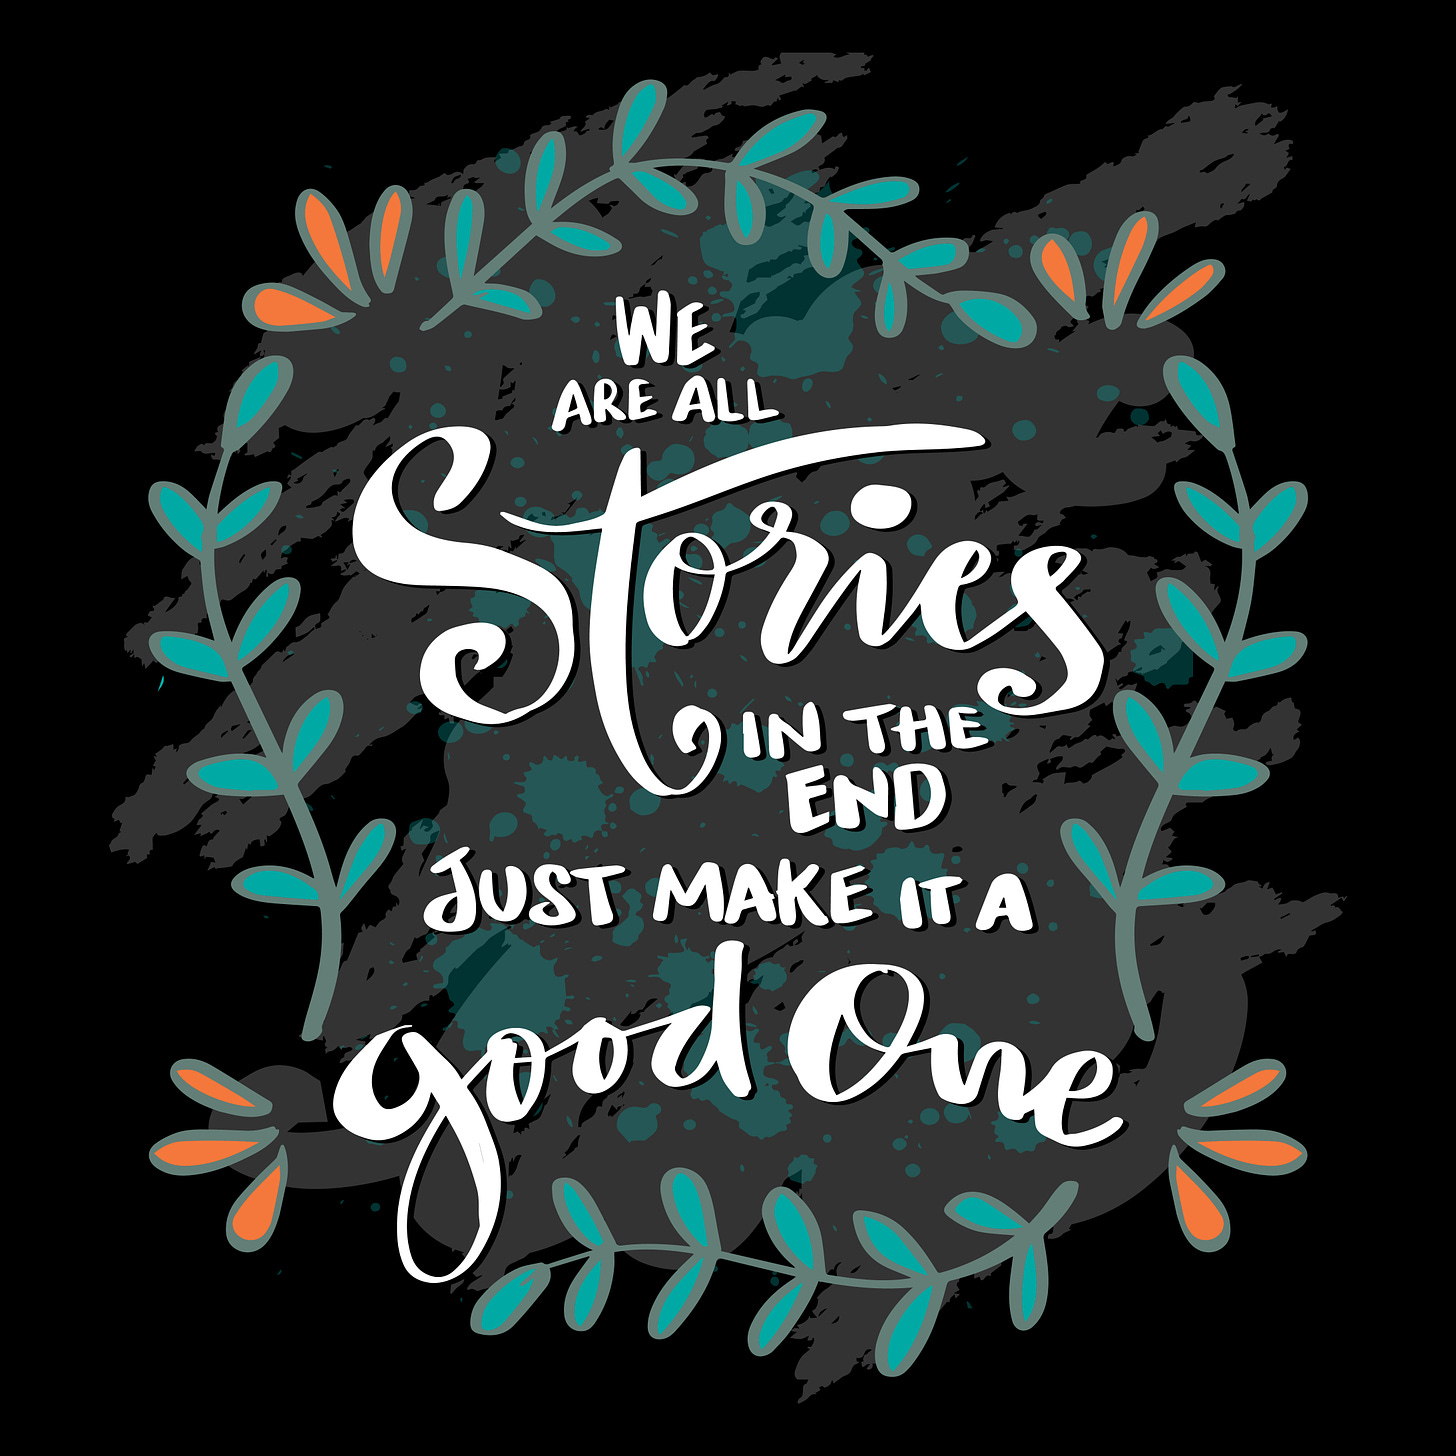 This is a quote from Doctor Who, written in white text against a black background. It reads "We are all stories in the end. Just make it a good one." Around the letters are abstract green leaves and orange flowers.